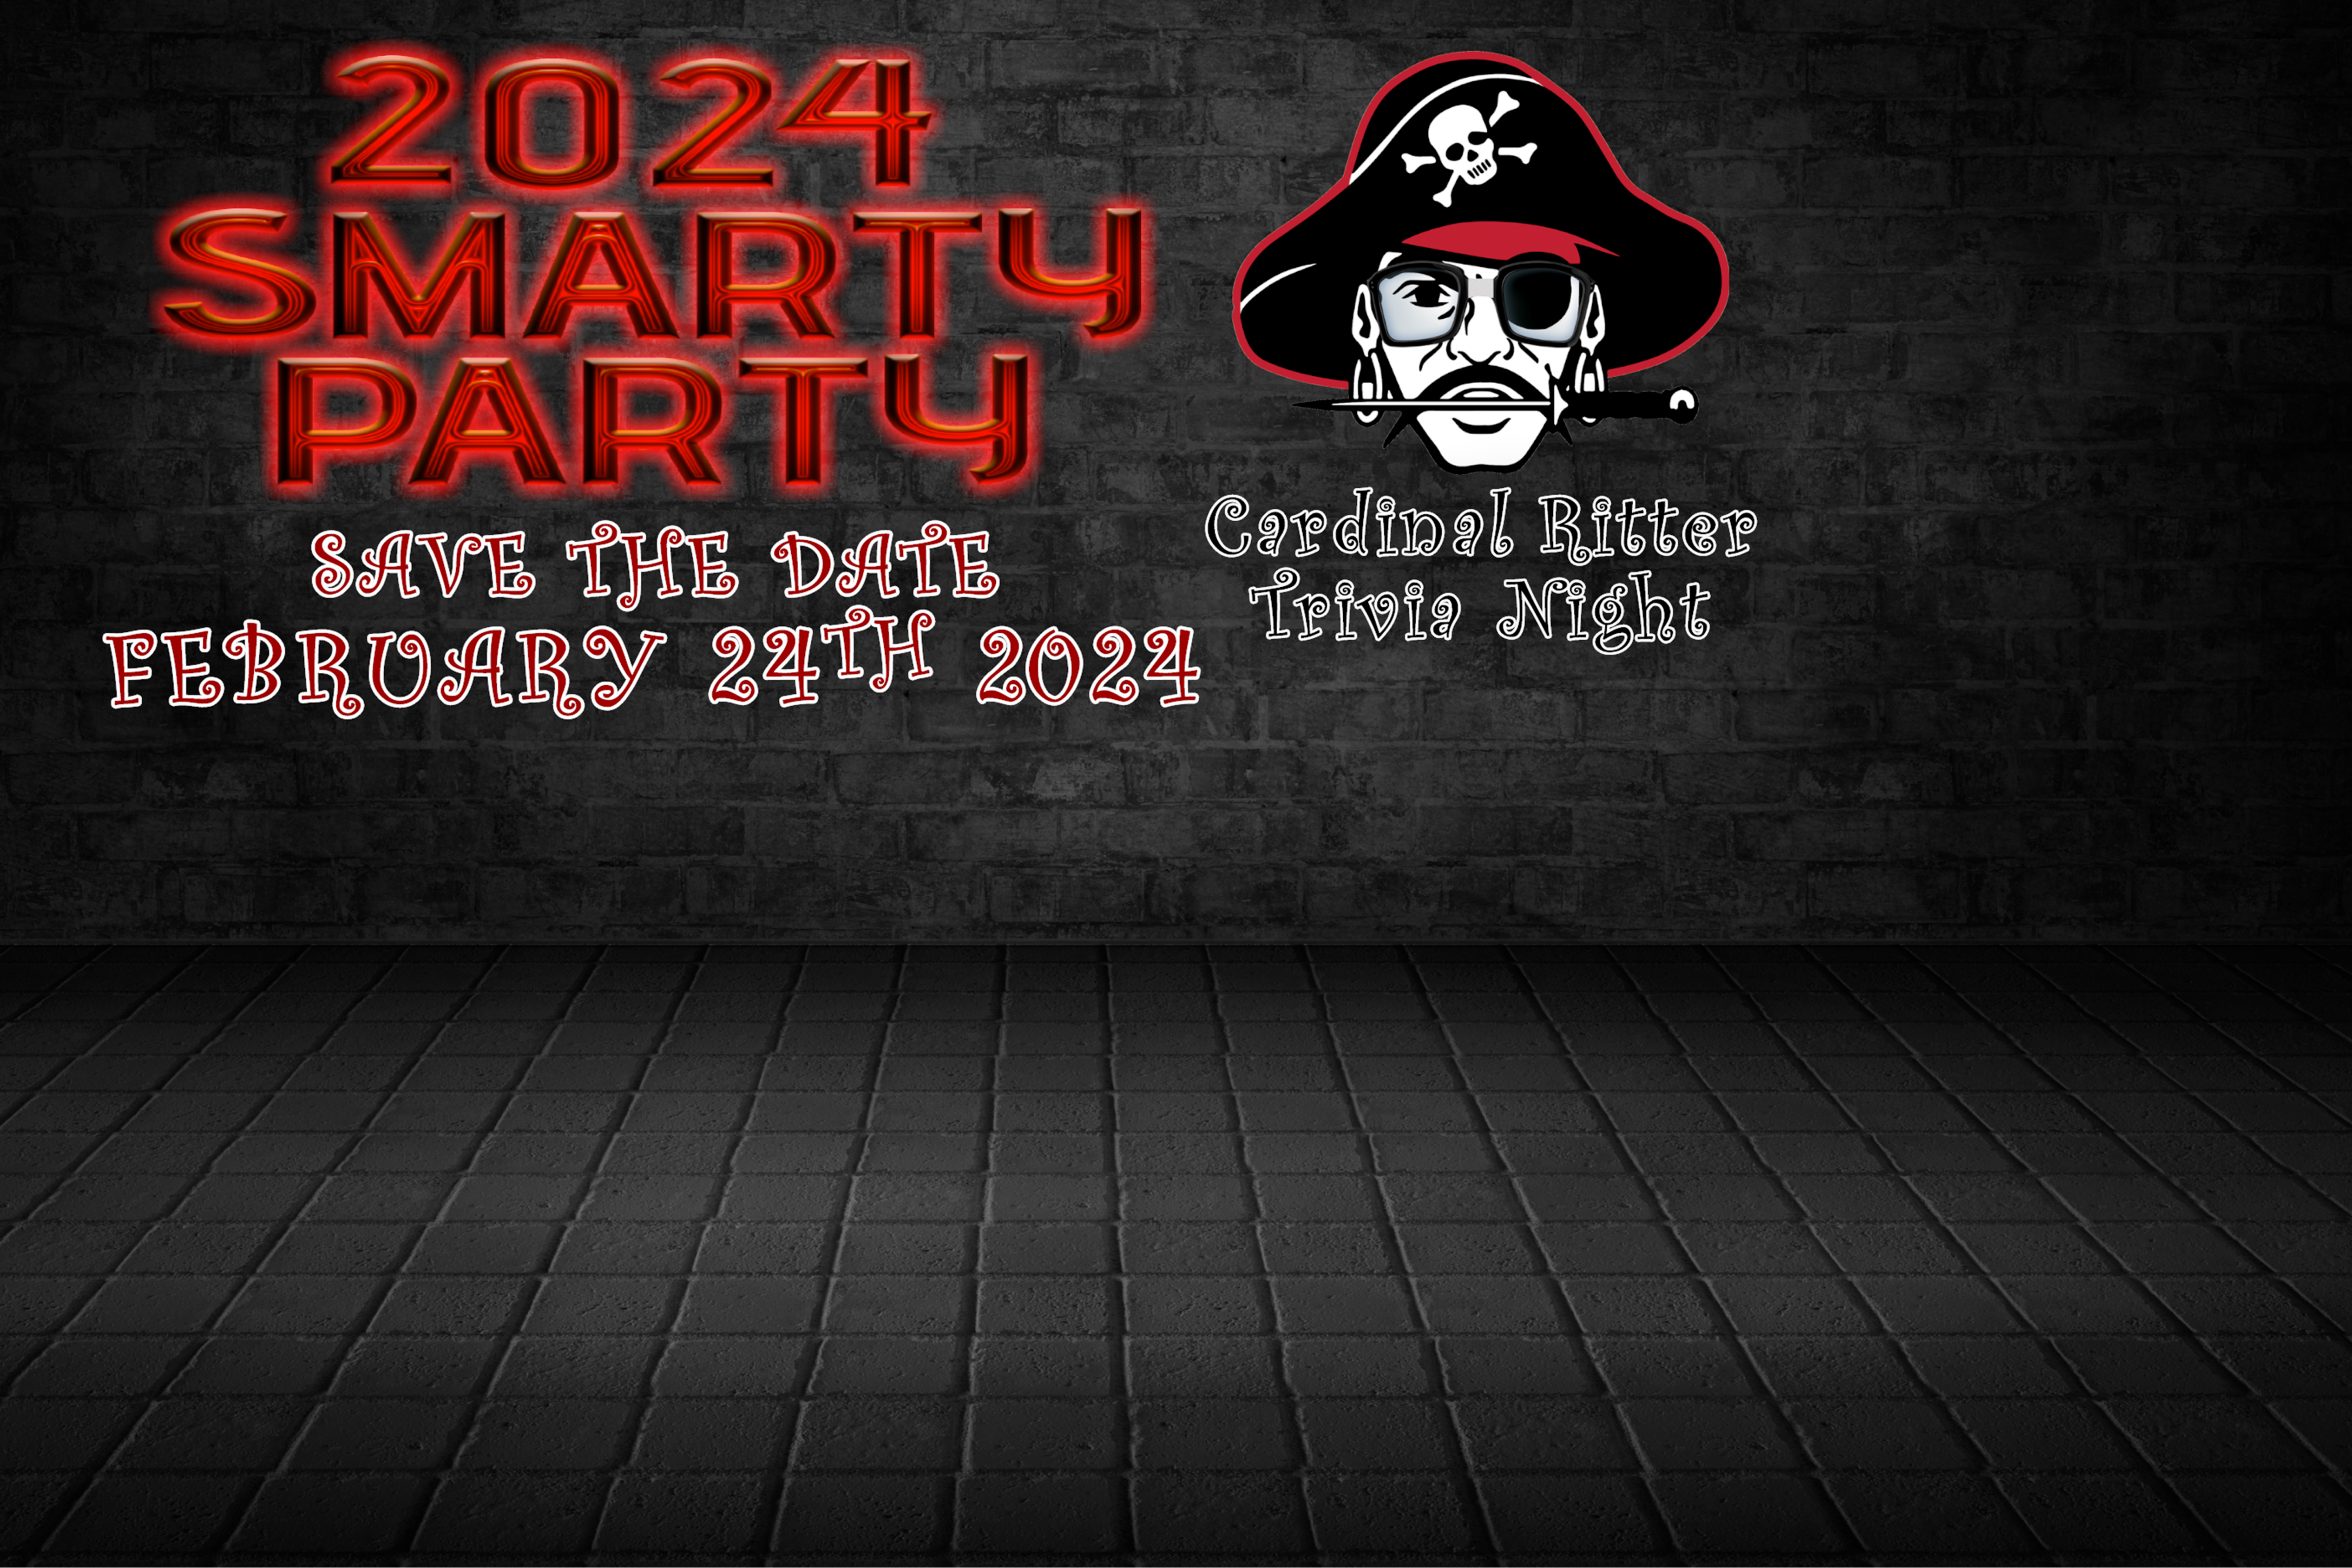 2024 Smarty Party - Save The Date